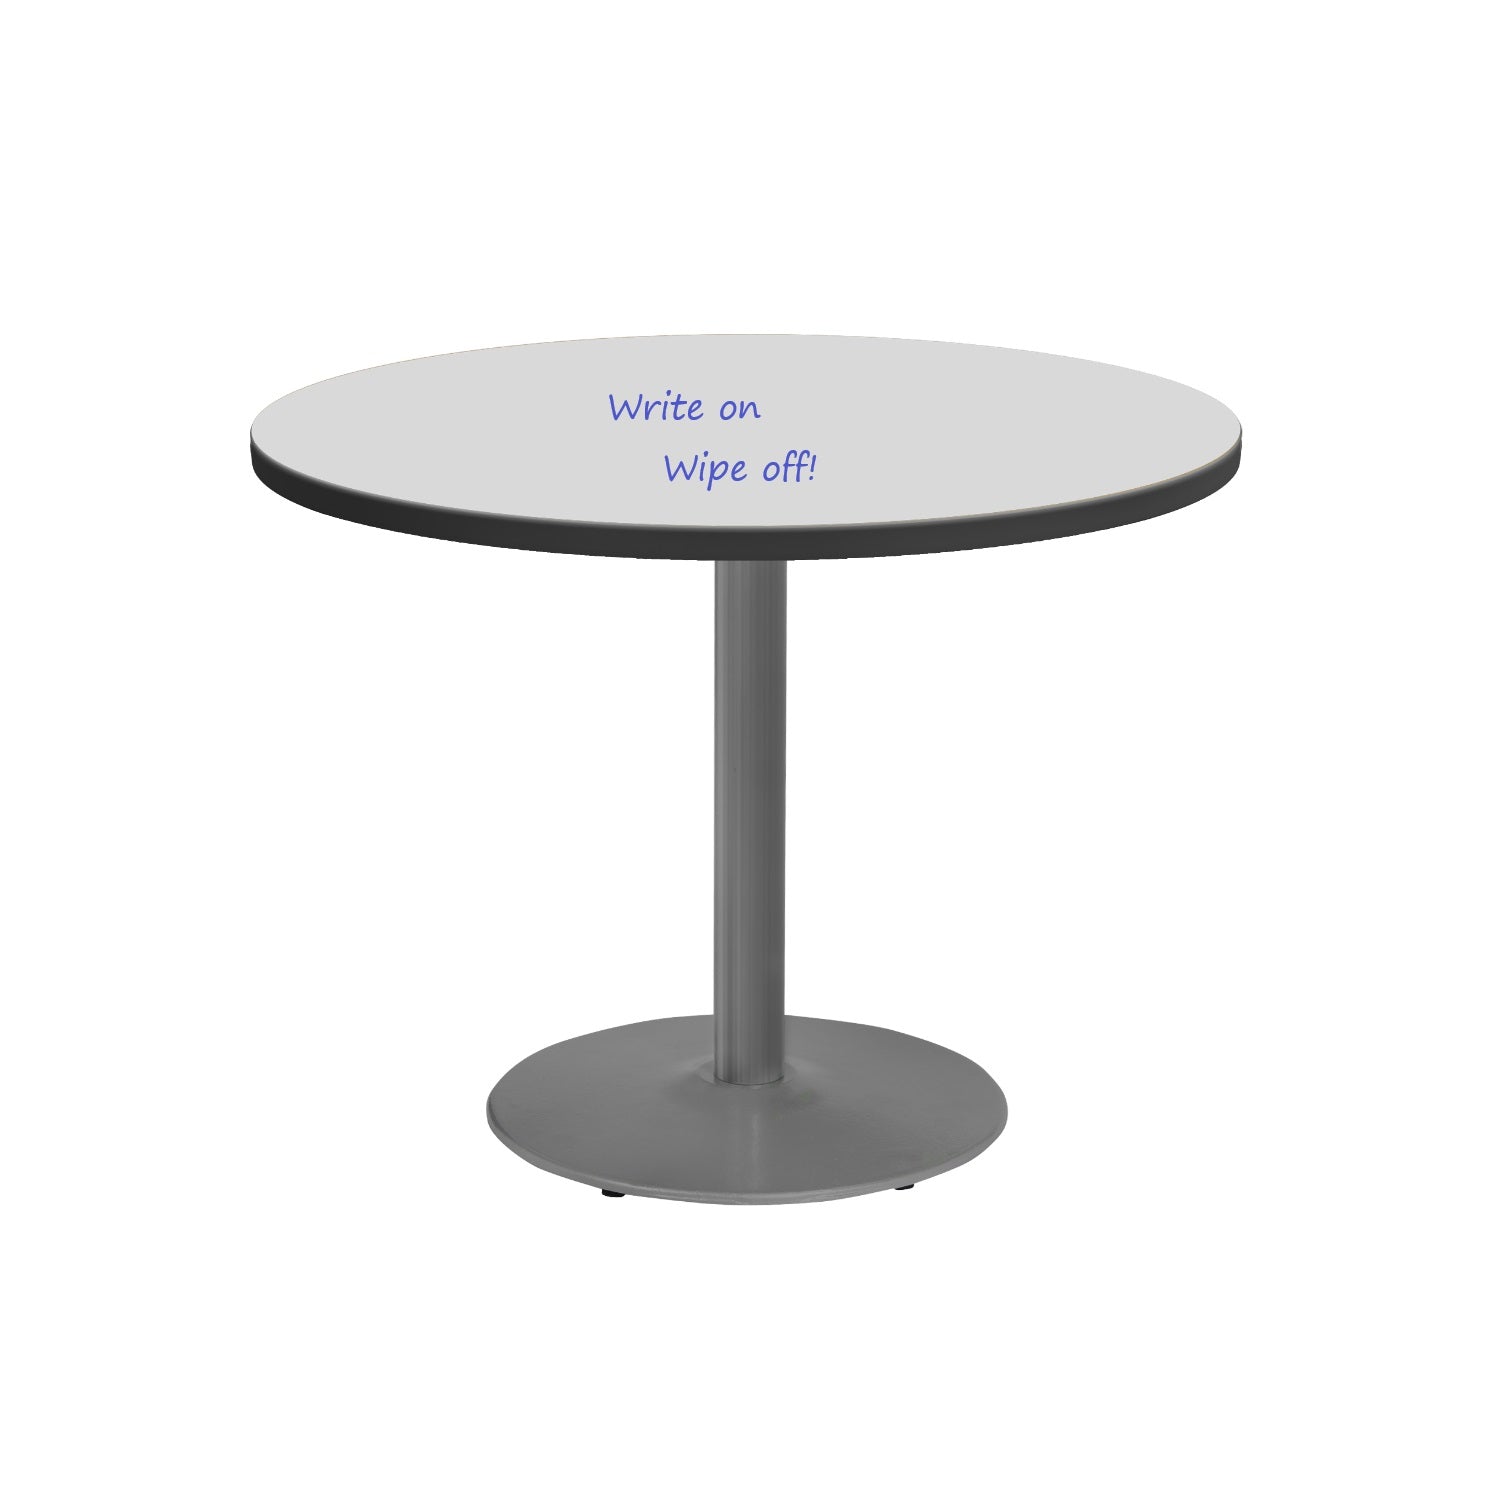 36" Round Sitting Height Café Table with Dry-Erase Whiteboard Top